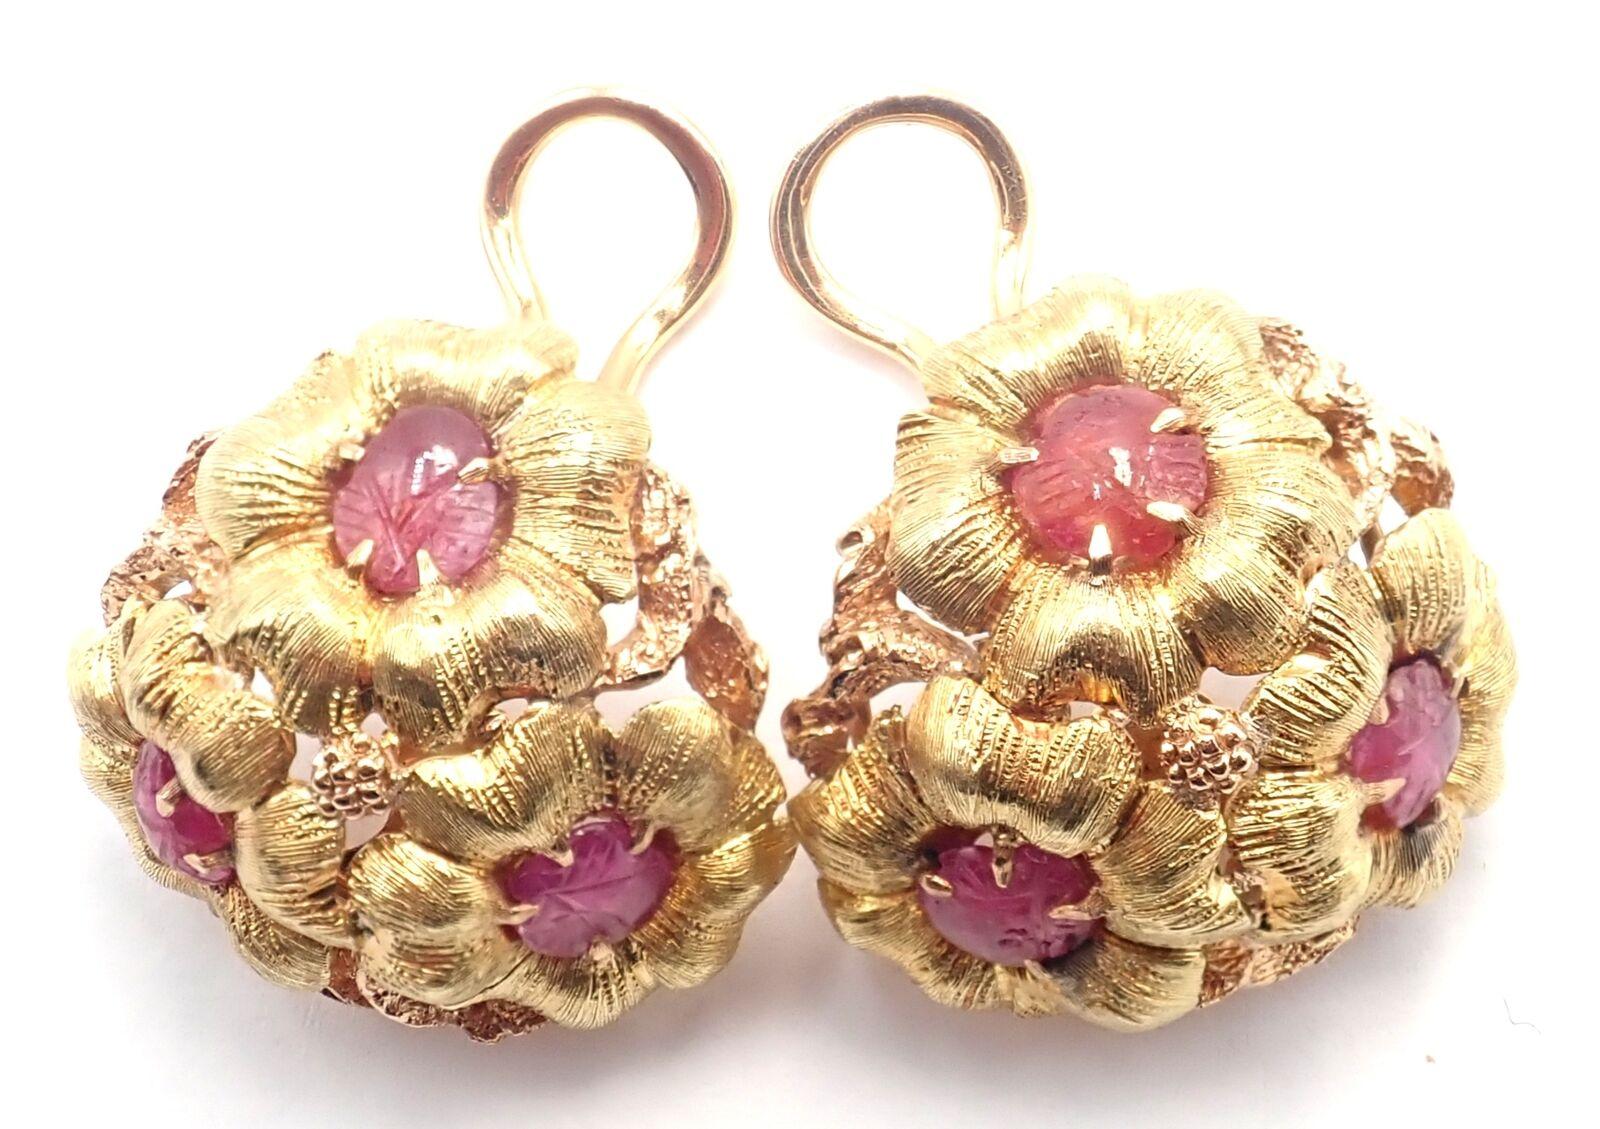 18k yellow gold vintage carved ruby handmade earrings by master jeweler BUCCELLATI. 
With 6 carved rubies.
These vintage Buccellati 18k yellow gold earrings showcase exquisite carved ruby flowers set at the center, surrounded by intricate gold leaf